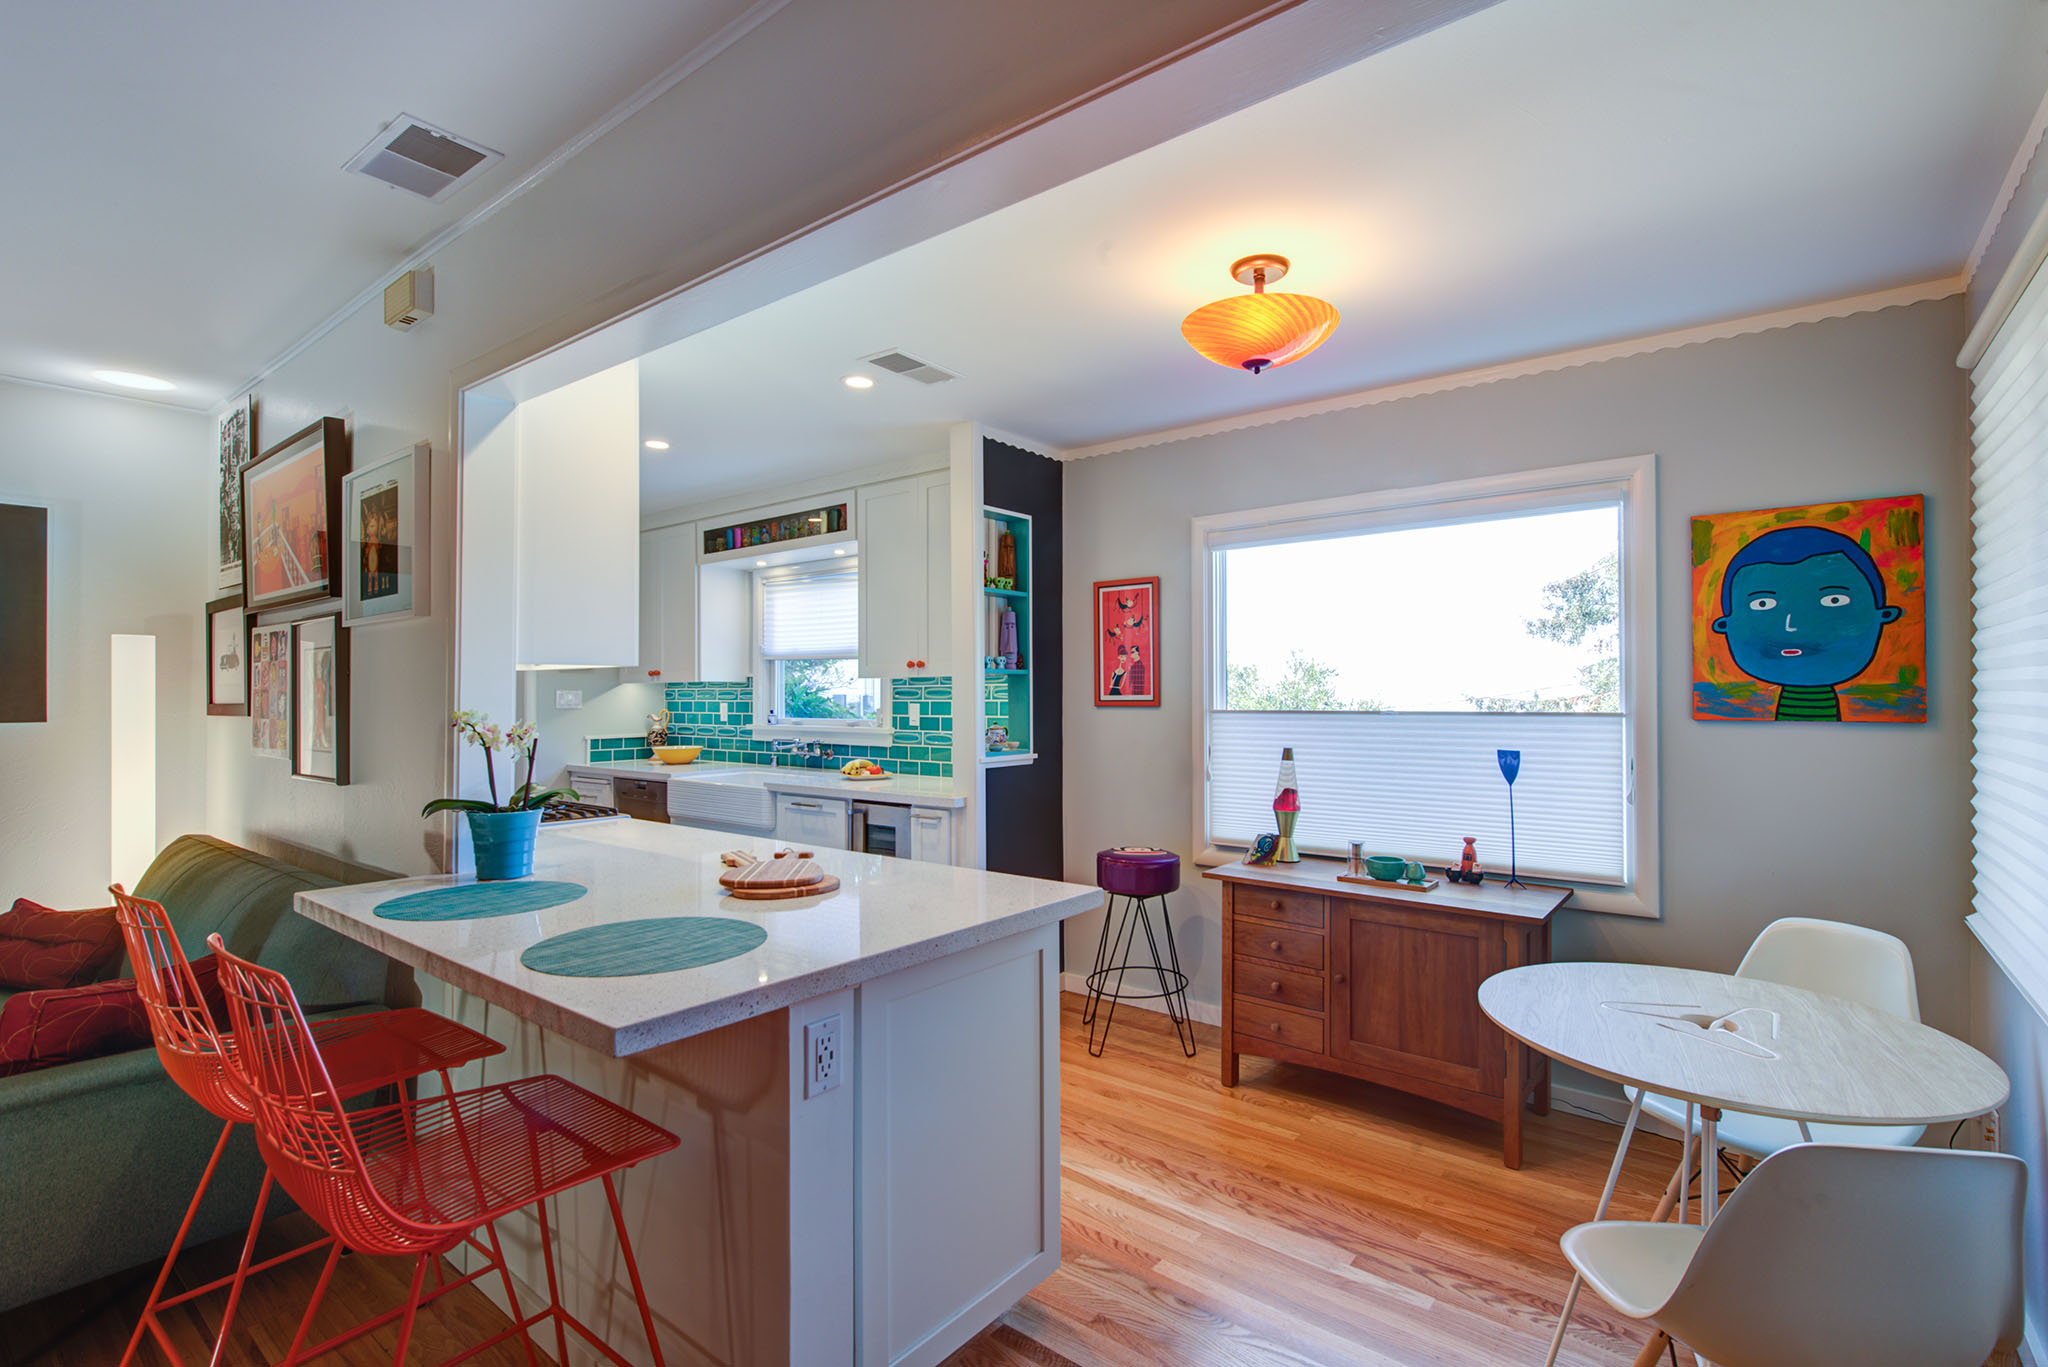 Customized Colorful Kitchen peninsula to nook